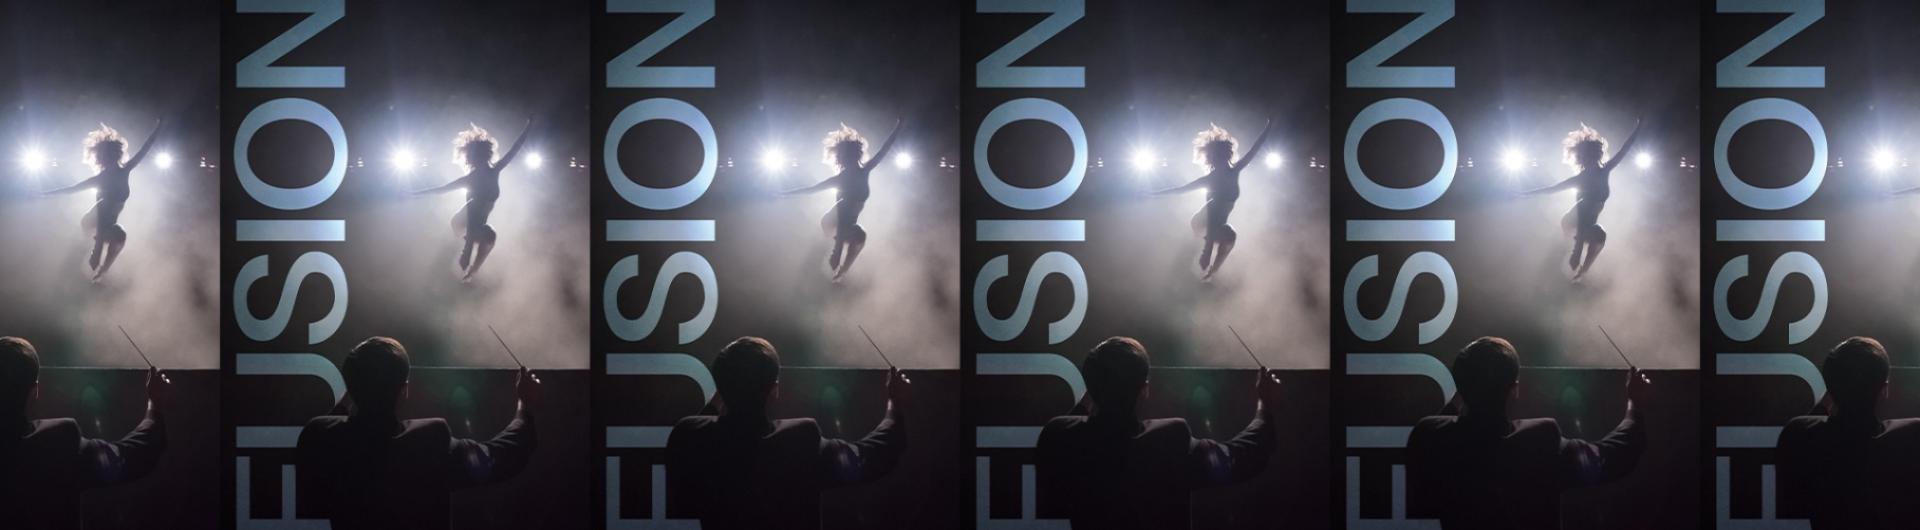 Fusion poster multiplied with dancer Jumping on a smokey stage